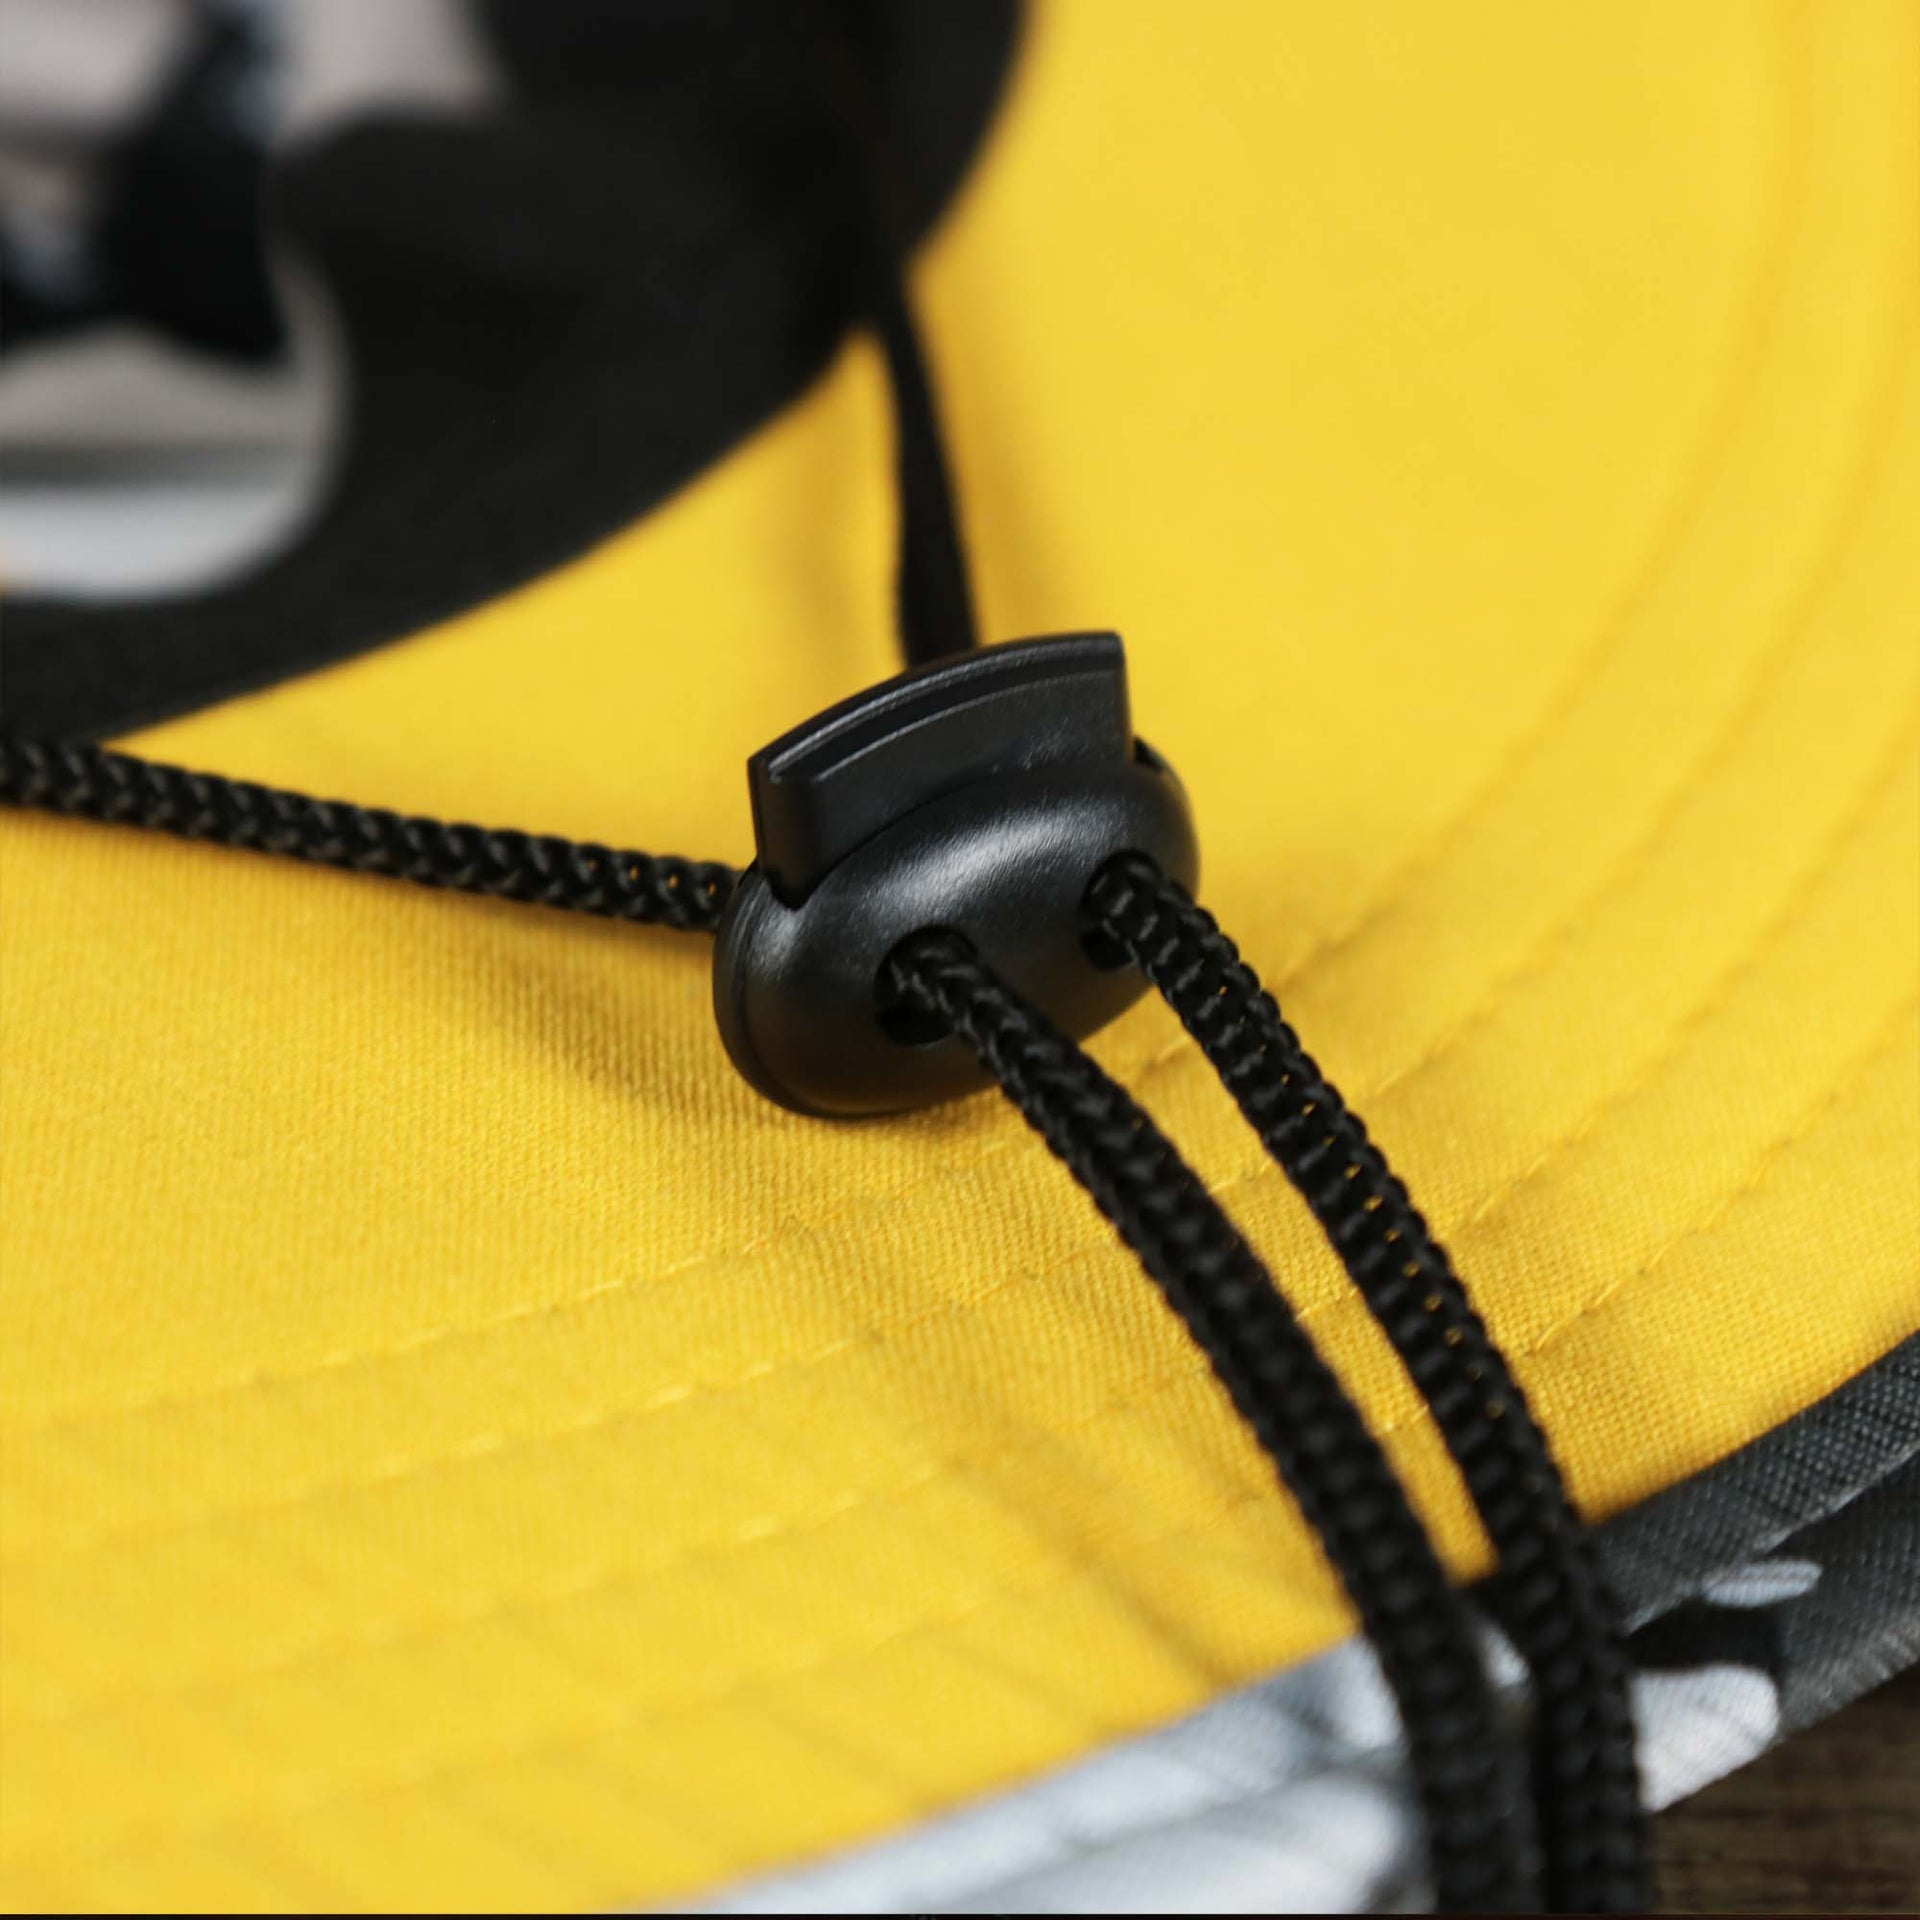 The Adjustable Chin Strap on the Pittsburgh Steelers NFL Summer Training Camp 2022 Camo Bucket Hat | Yellow Bucket Hat